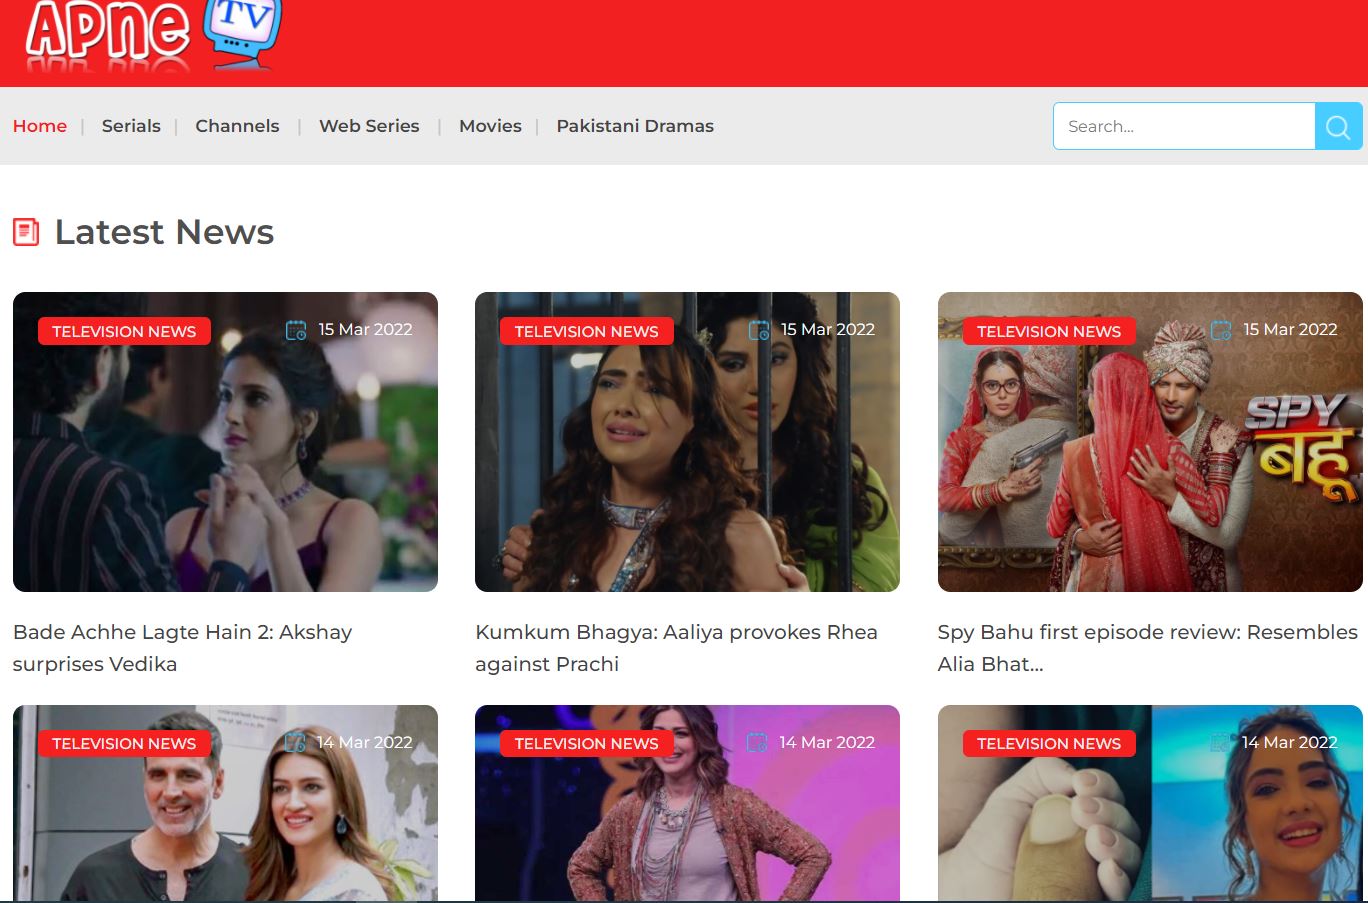 ApneTV Offers Indian Serials, Hindi Dramas, International Documentaries, And More On Its Website